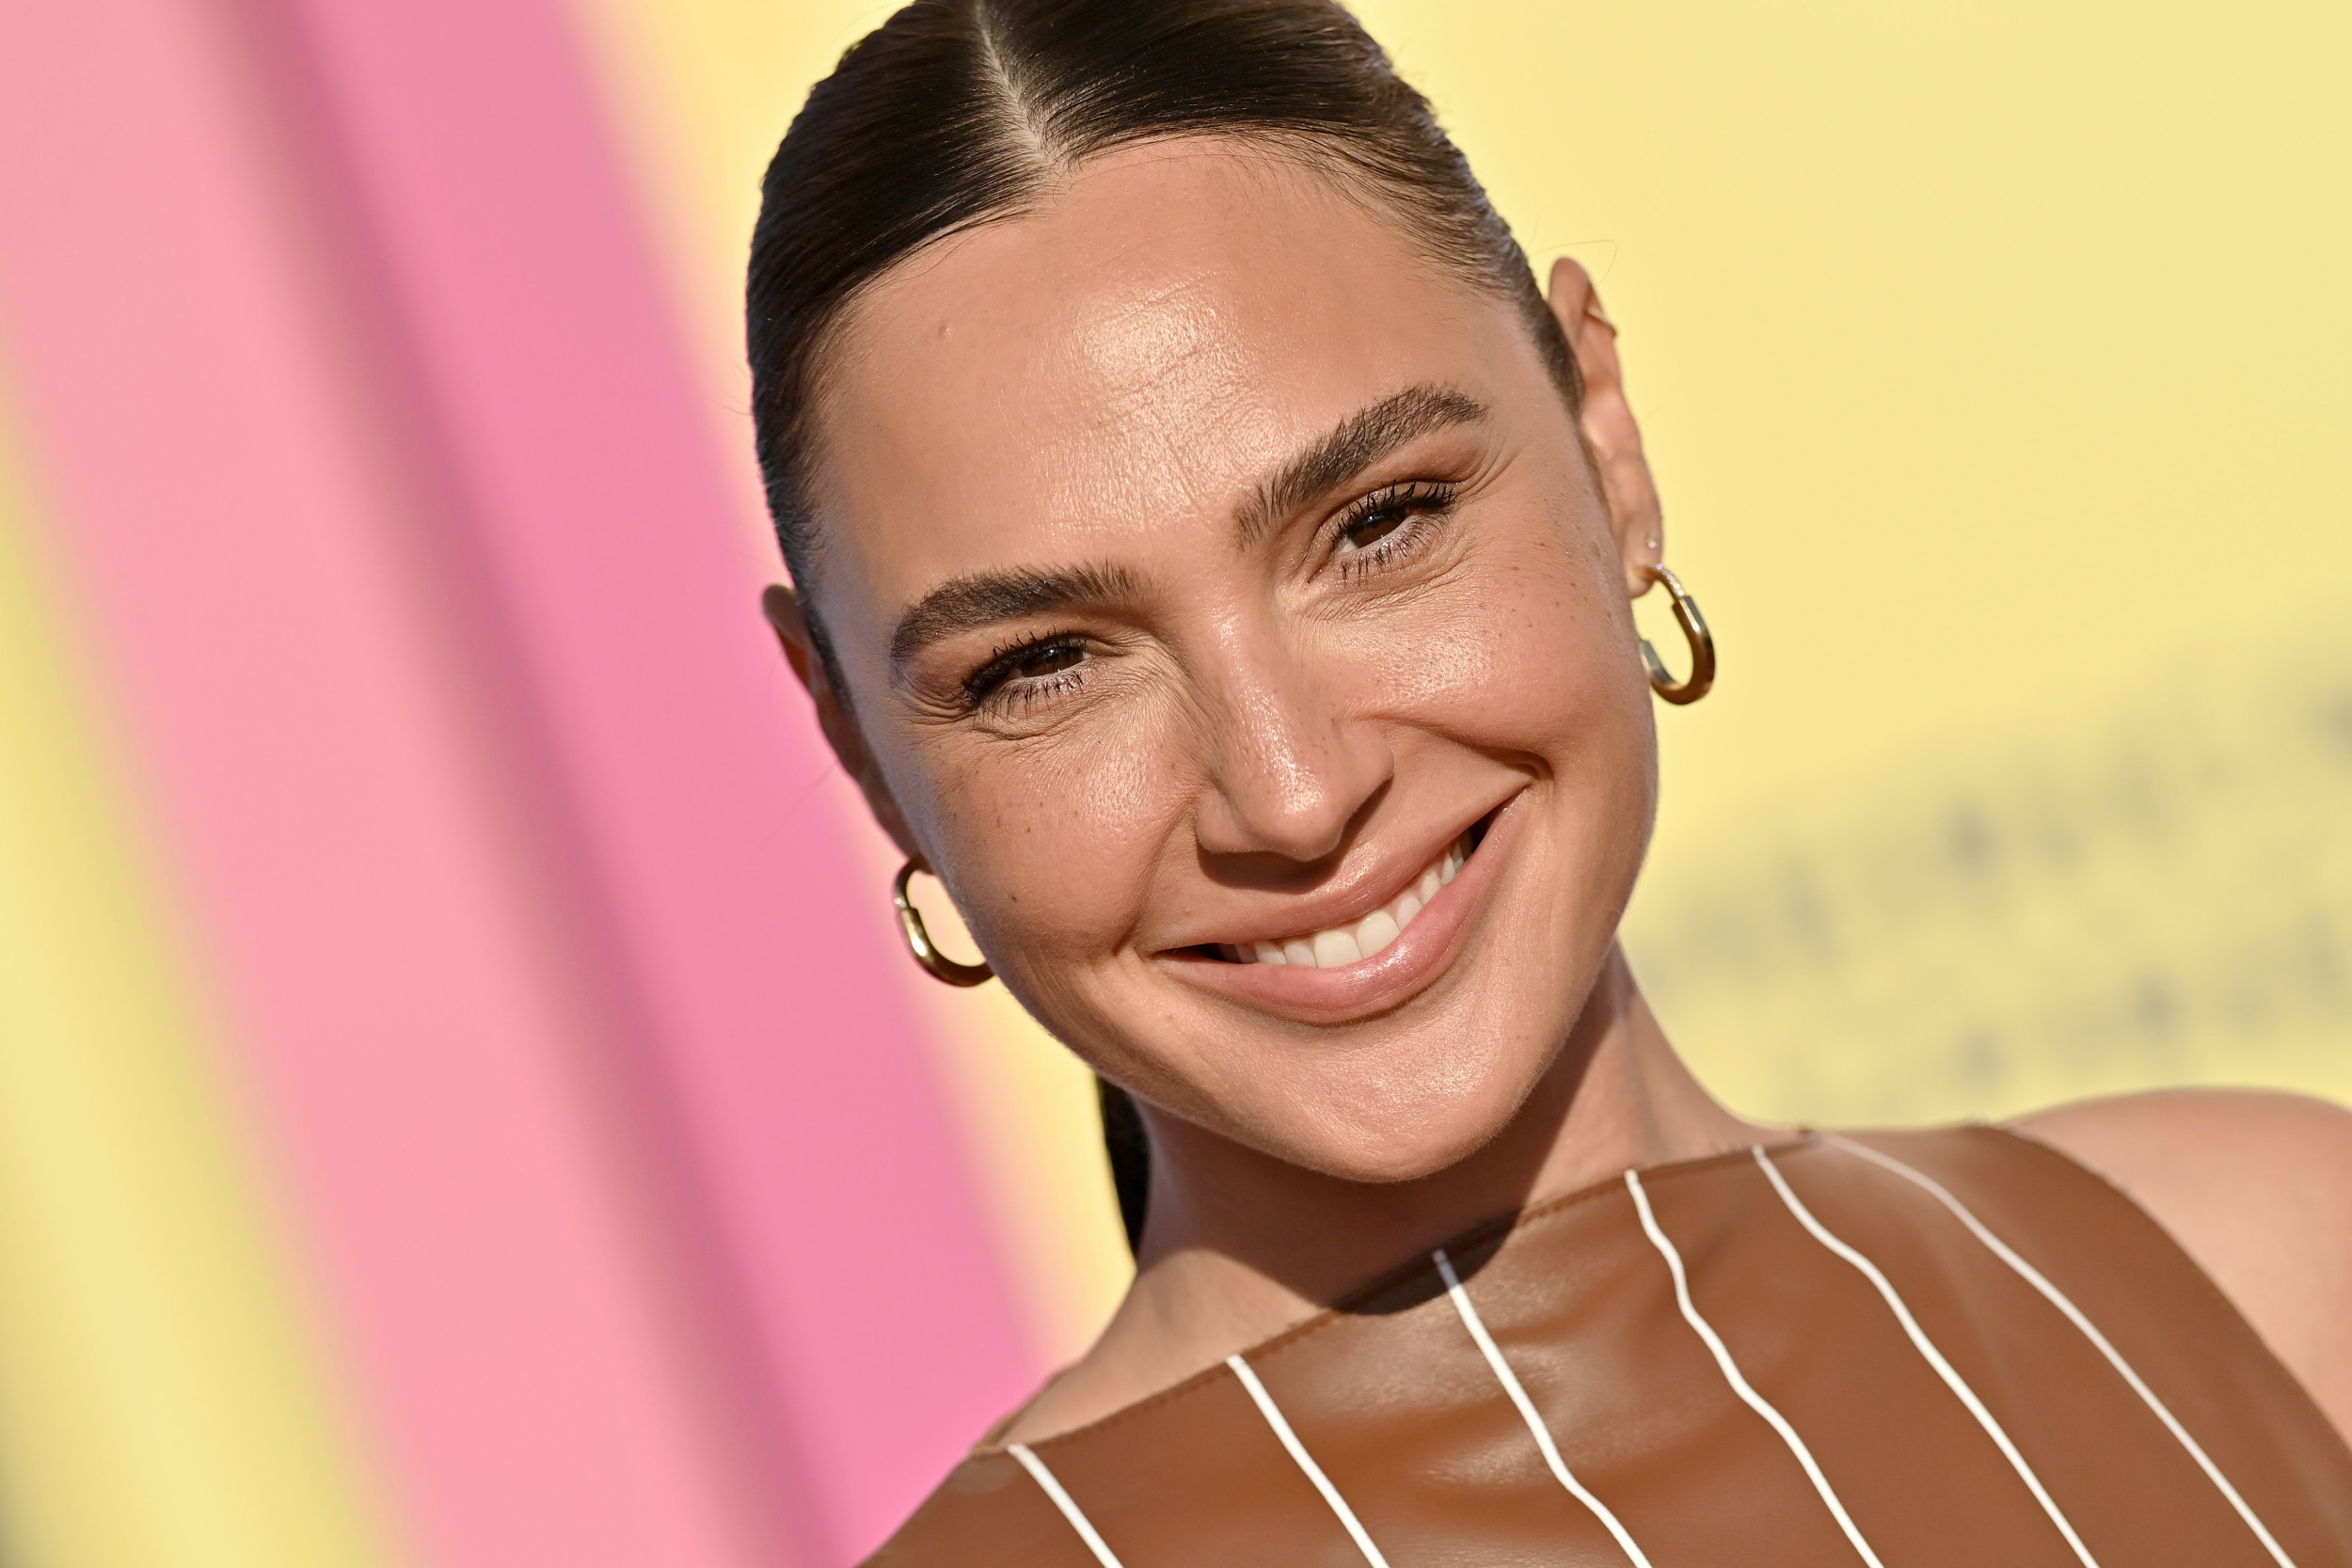 Everything Gal Gadot Has Said About Israel Attack by Hamas